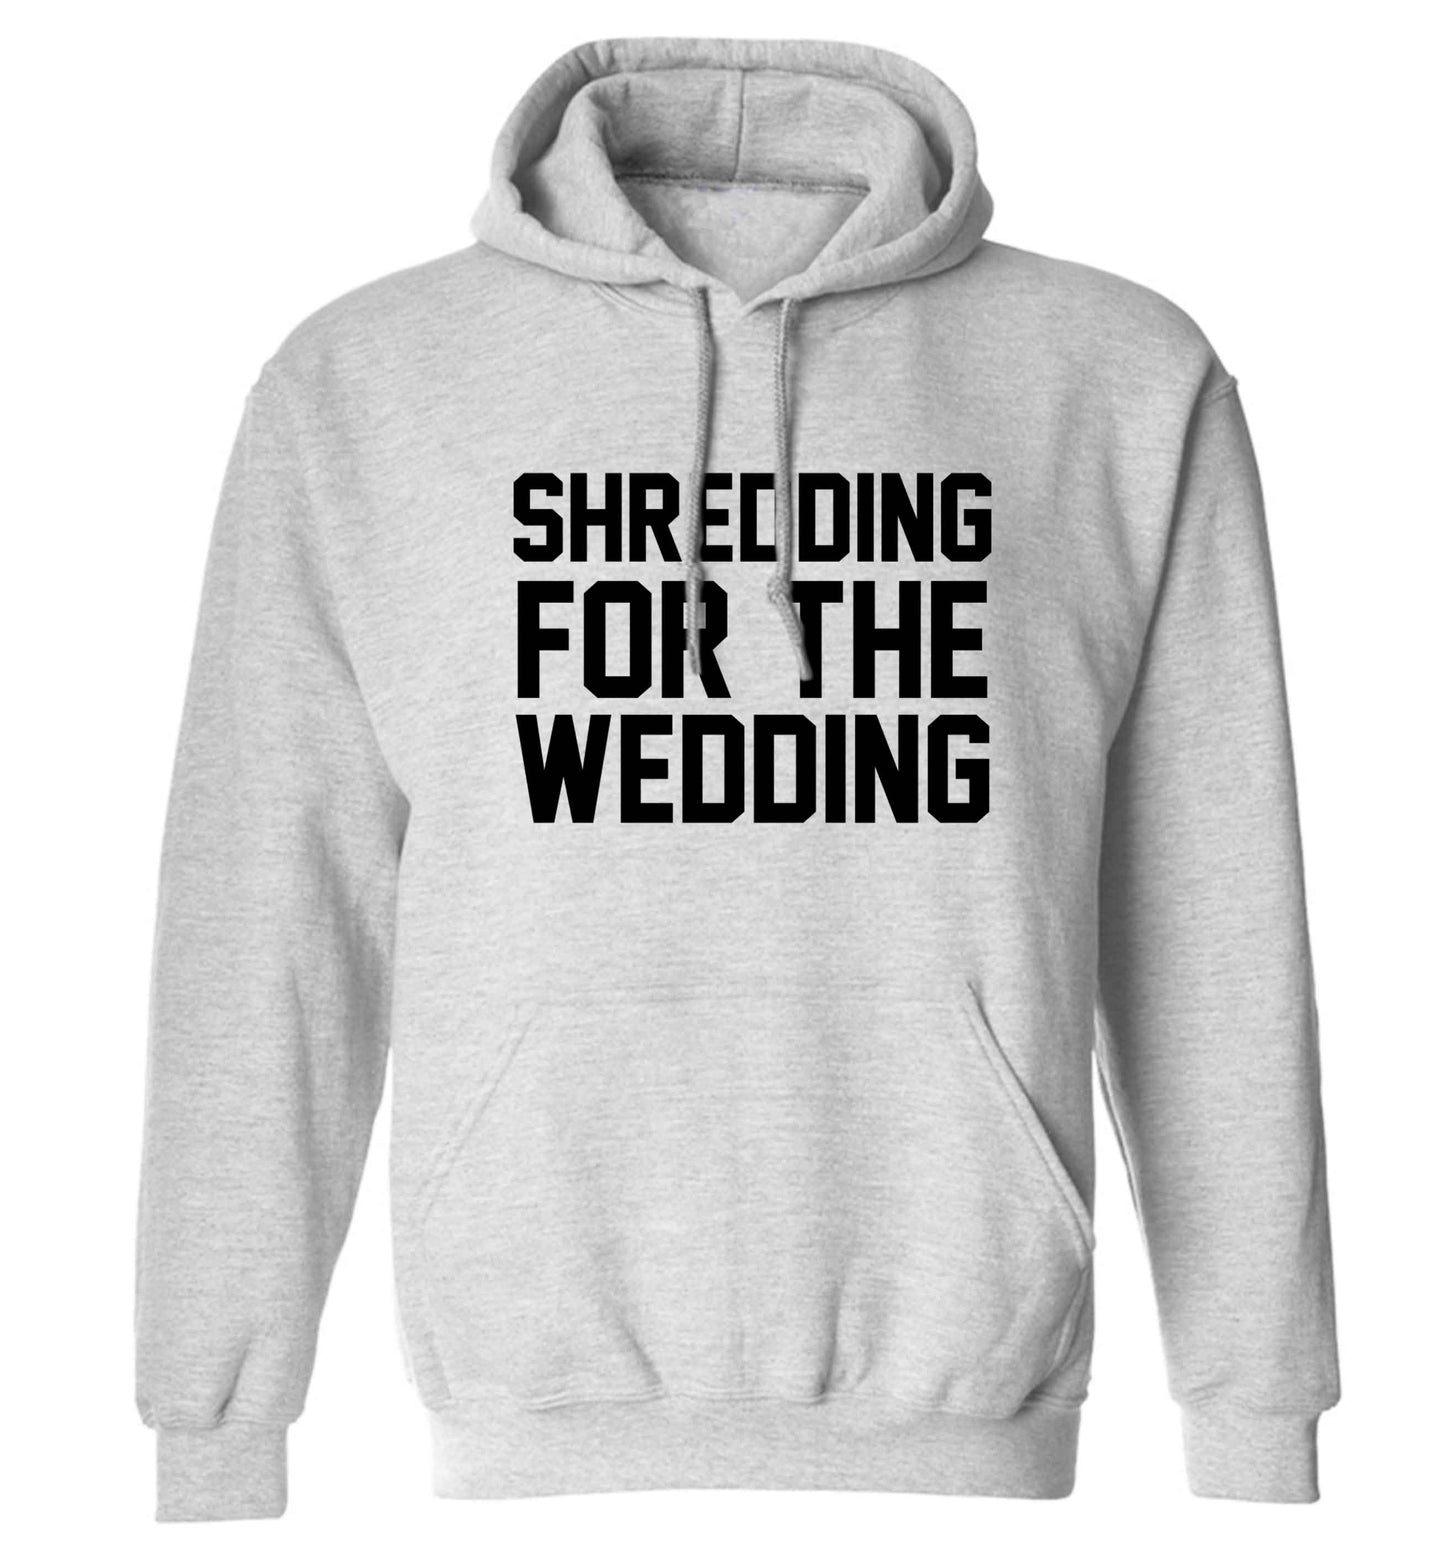 Get motivated and get fit for your big day! Our workout quotes and designs will get you ready to sweat! Perfect for any bride, groom or bridesmaid to be!  adults unisex grey hoodie 2XL